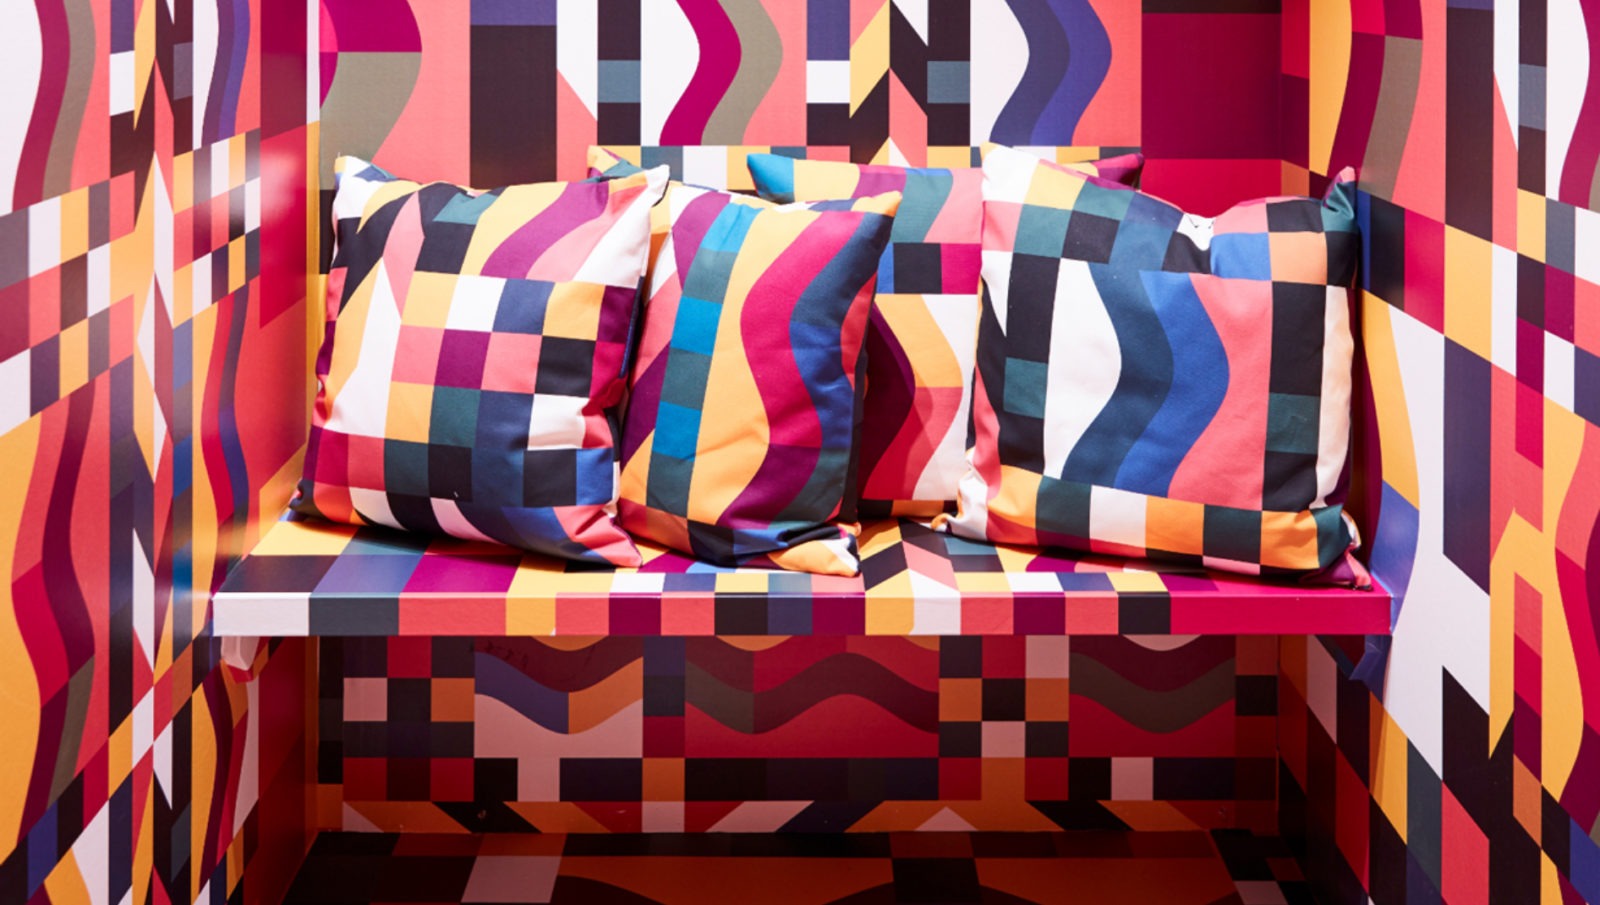 A tiny space with just one bench with pillows. They, and all the surfaces, are covered with a bold, colourful, graphic pattern.